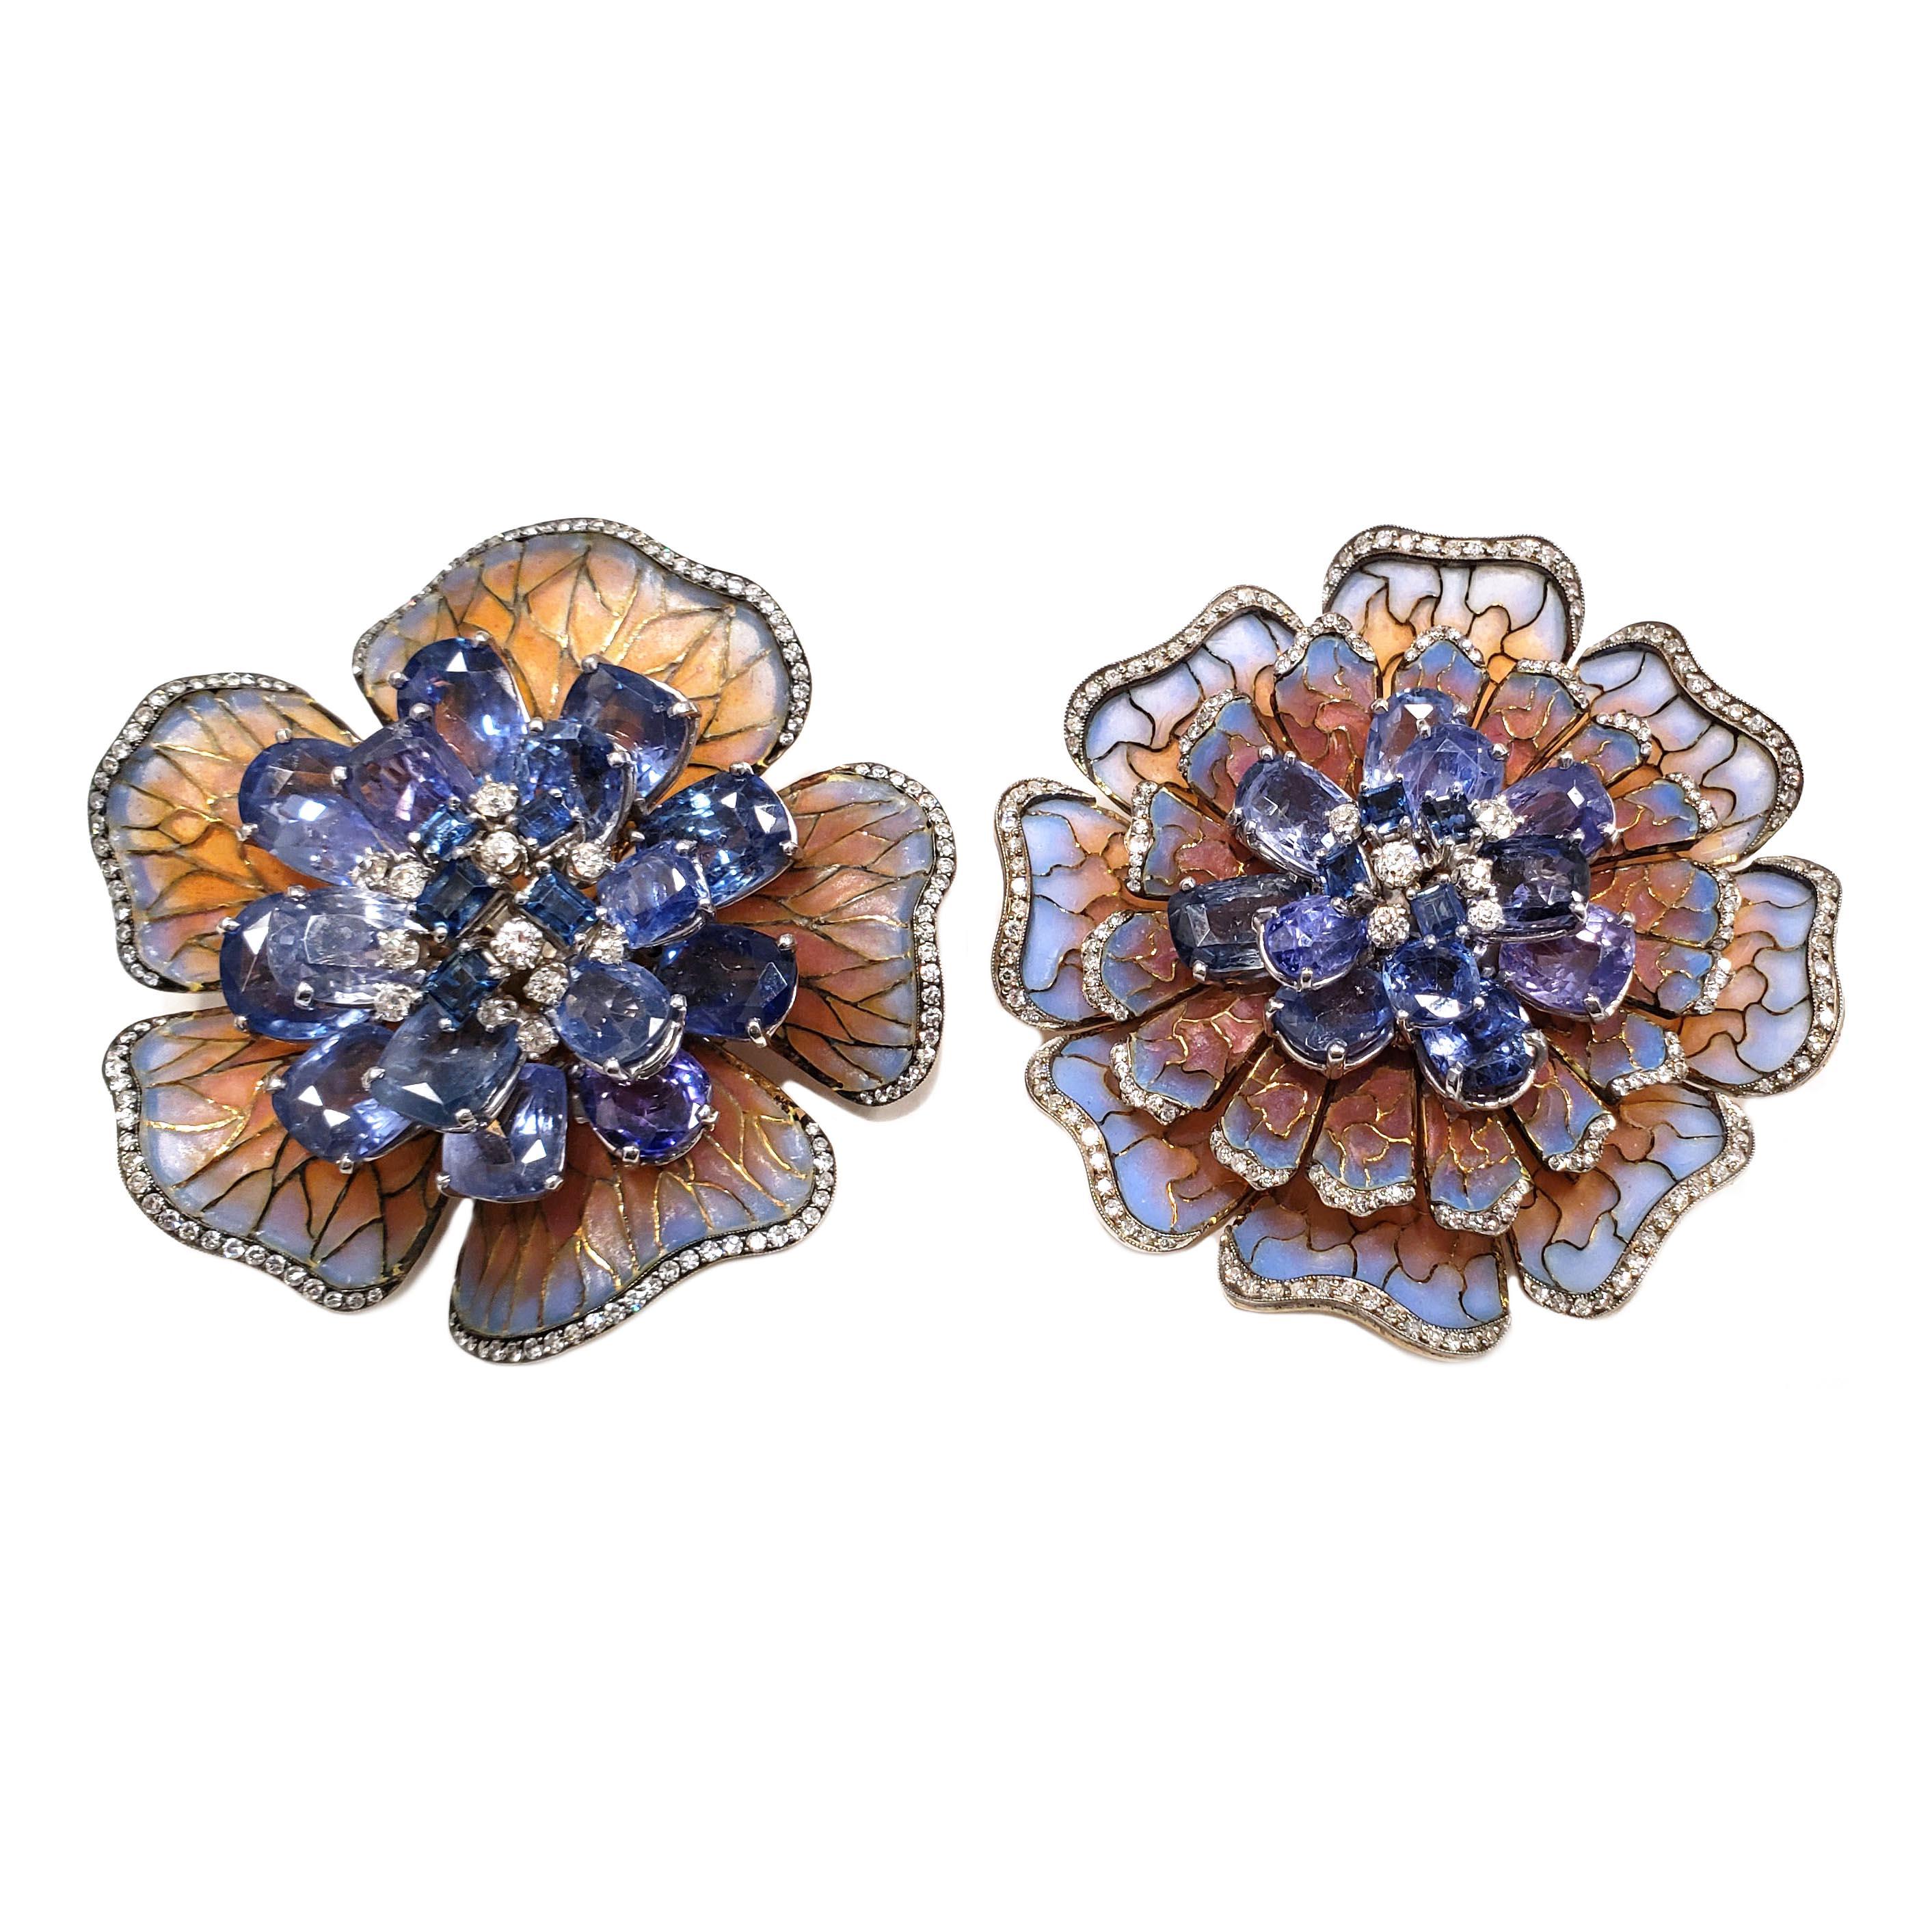 Beautiful pair of sapphire and diamond flower Plique-à-jour pins/ brooches by Moira. The pins are in excellent condition. There is an estimated total weight 84.00 carats in sapphires. One pin has an estimated 50.00 carats in sapphires and the other